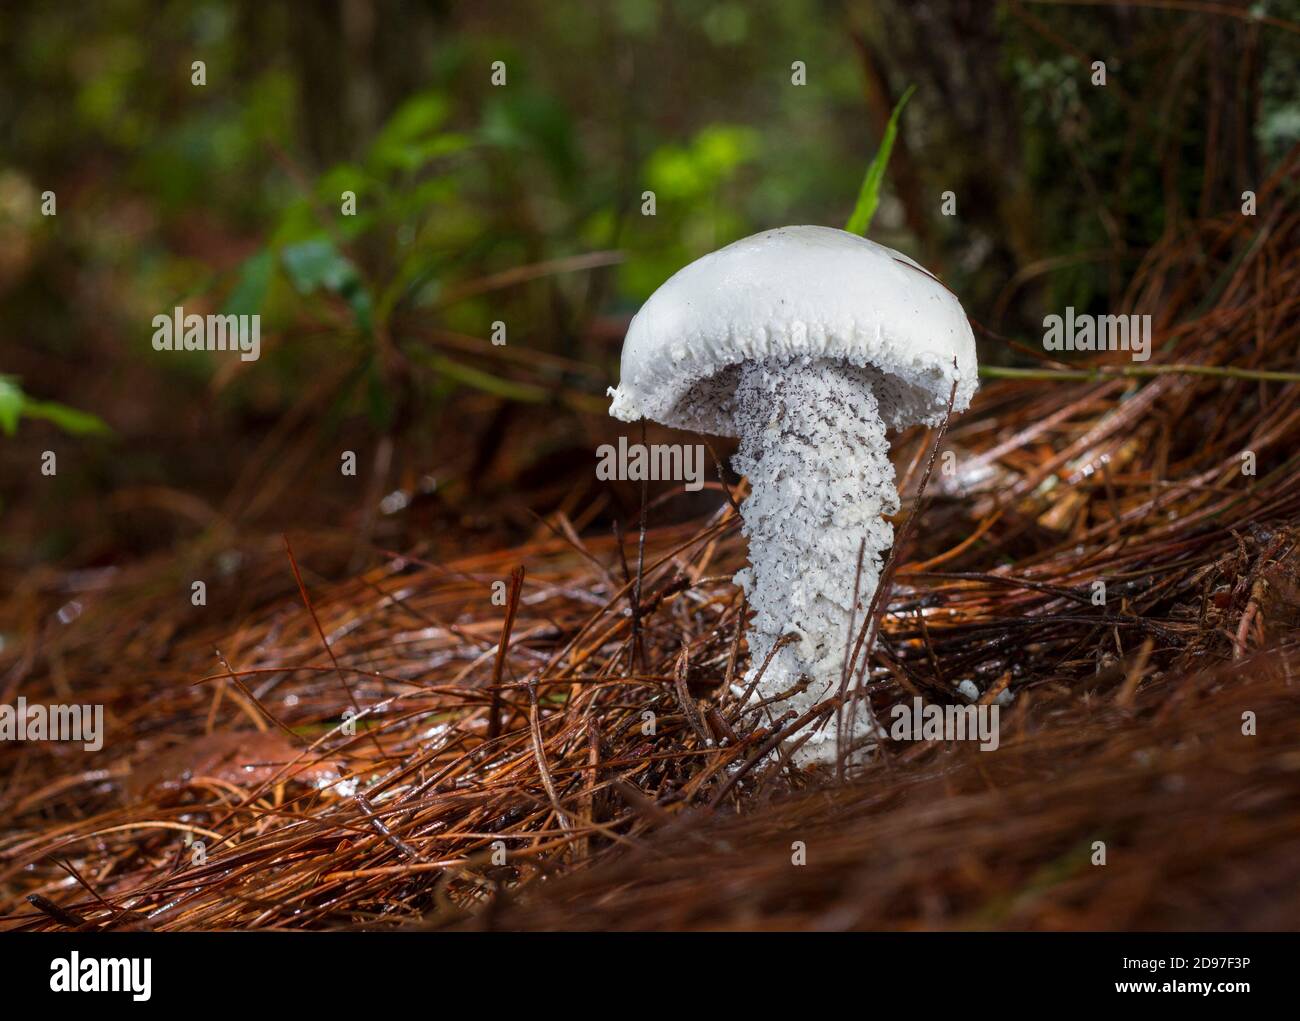 Toxic fungus (Amanita virosa) on the ground, it should be noted that there are many hexapod arthropods of the order Collembola. Highlands of Chiapas, Stock Photo